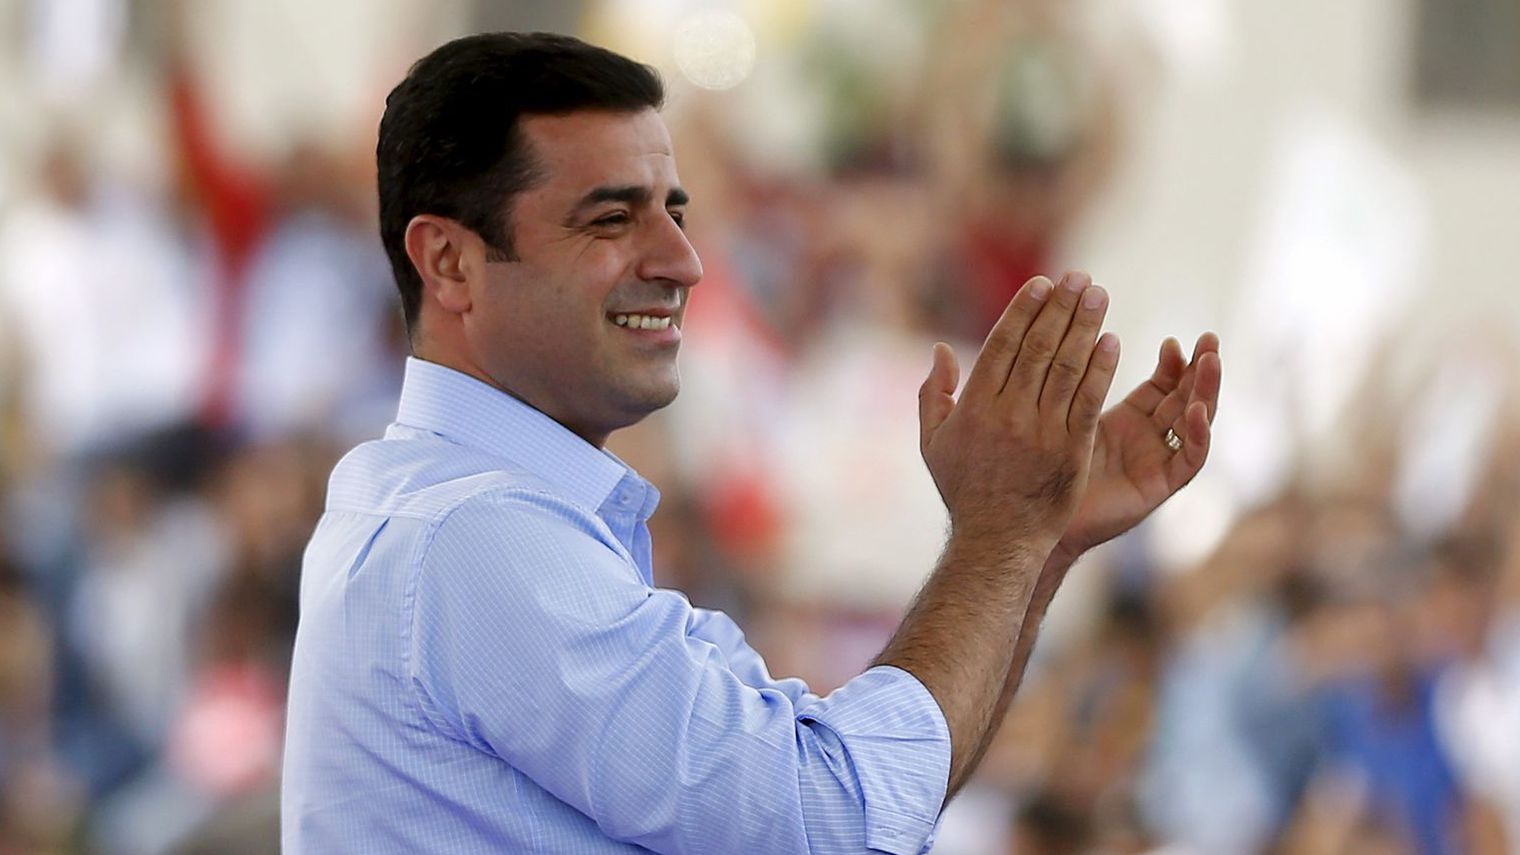 Selahattin Demirtas vows to bring peace if he is elected in presidential elections.